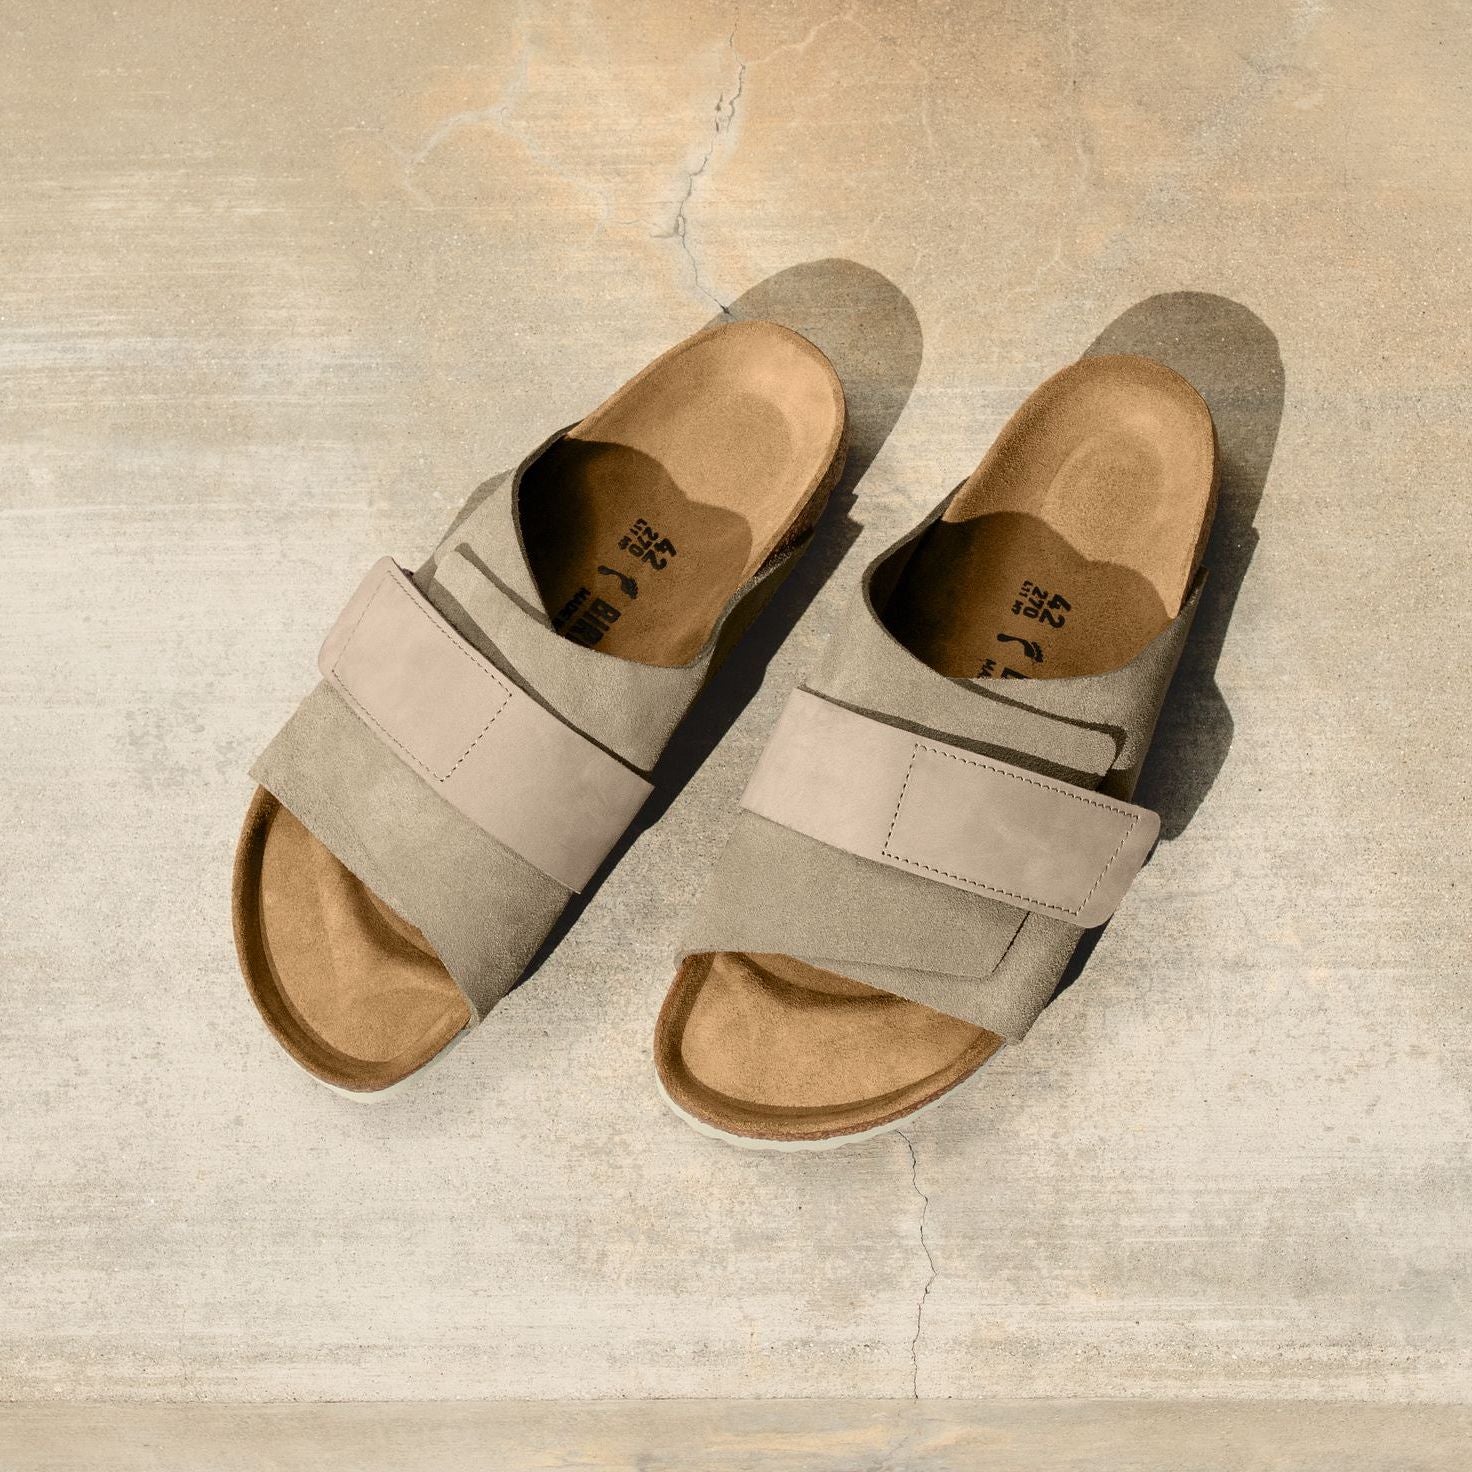 Birkenstock Limited Edition Kyoto gray taupe suede/taupe nubuck